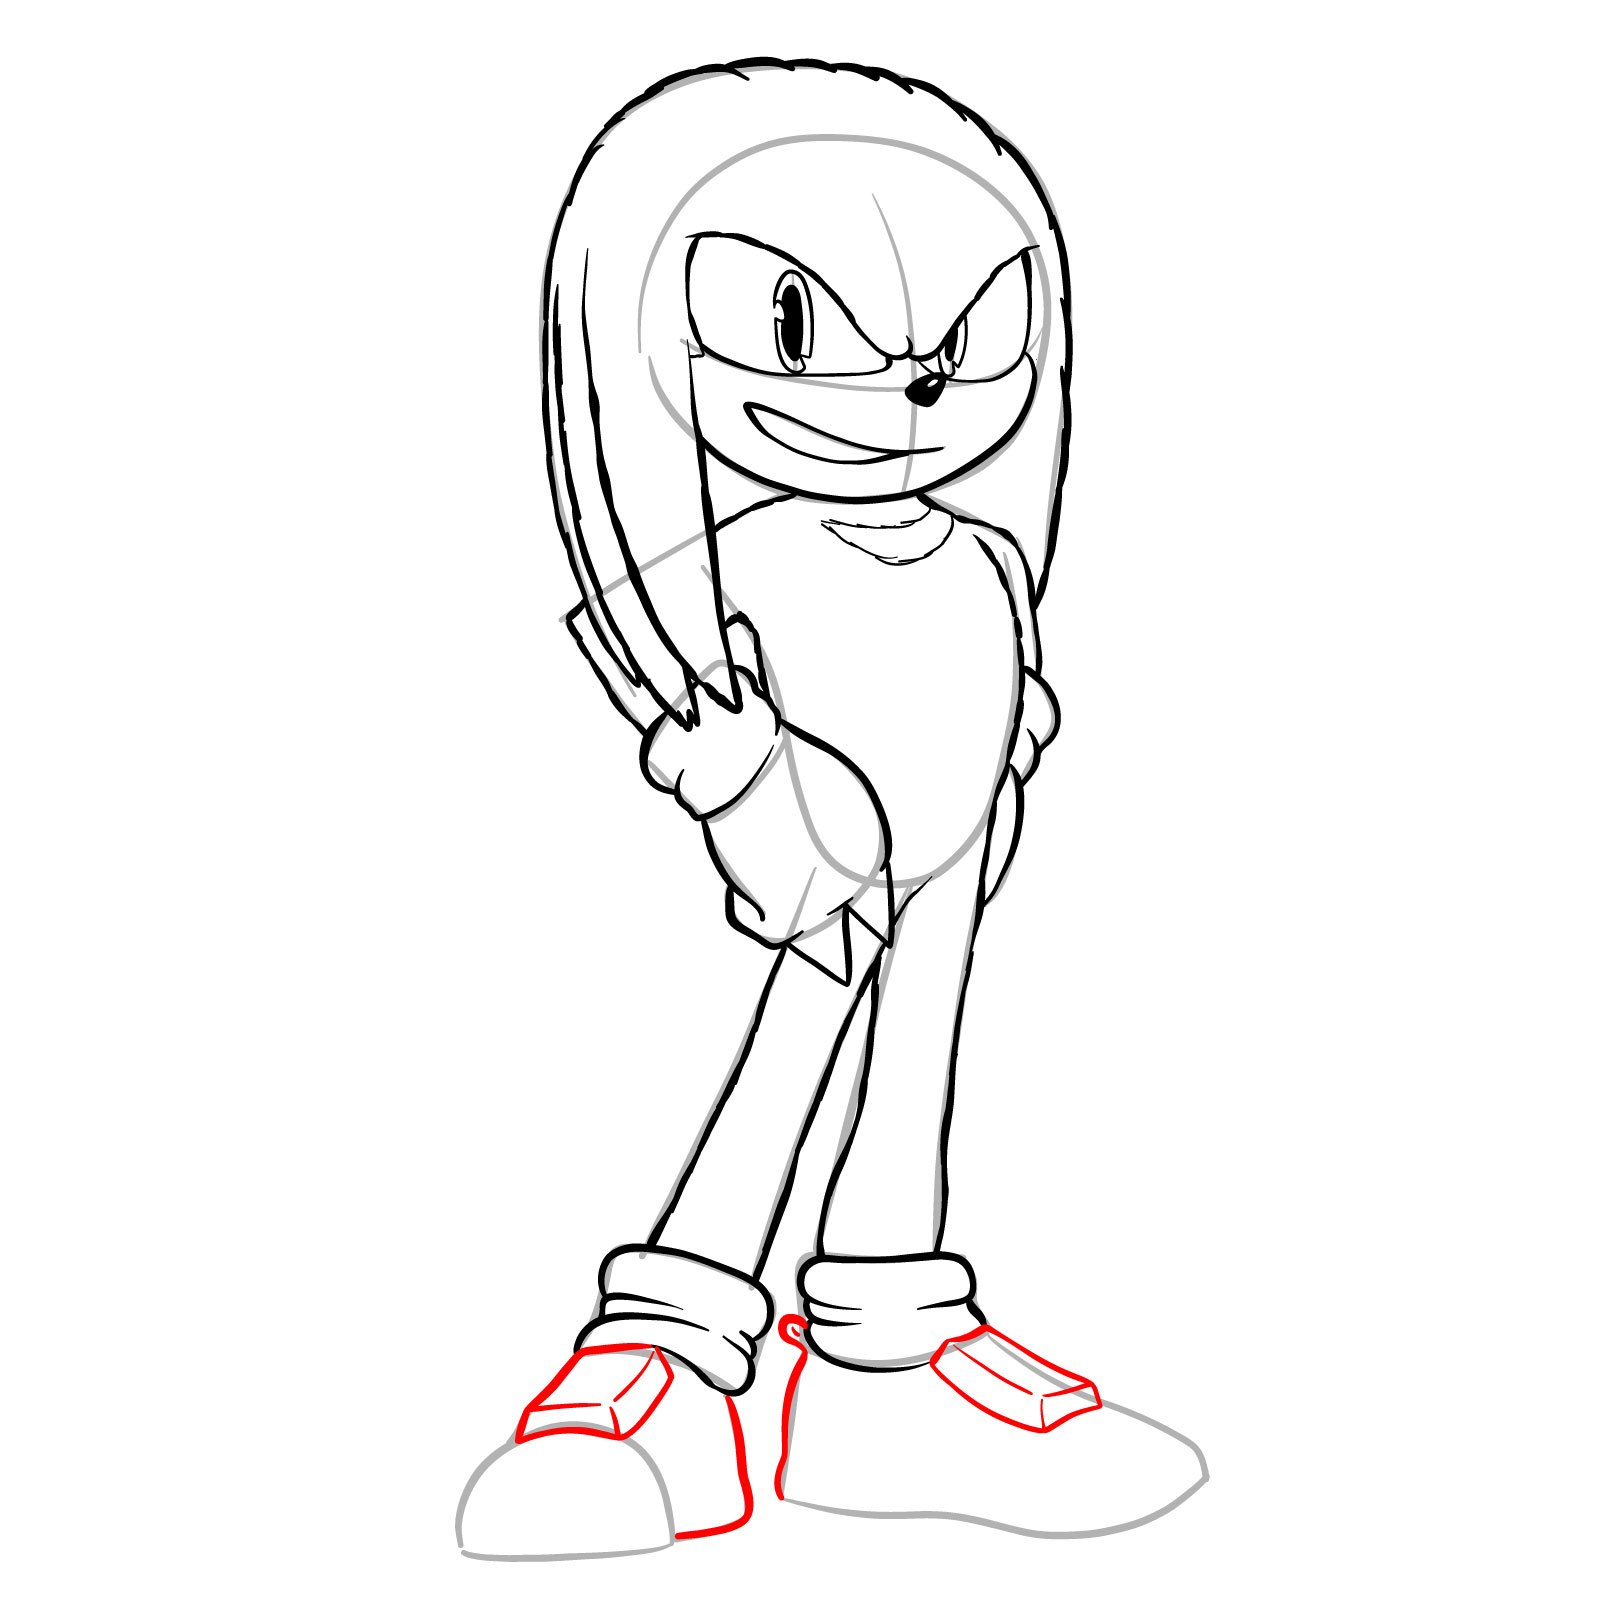 How to draw Knuckles from the movie - step 20